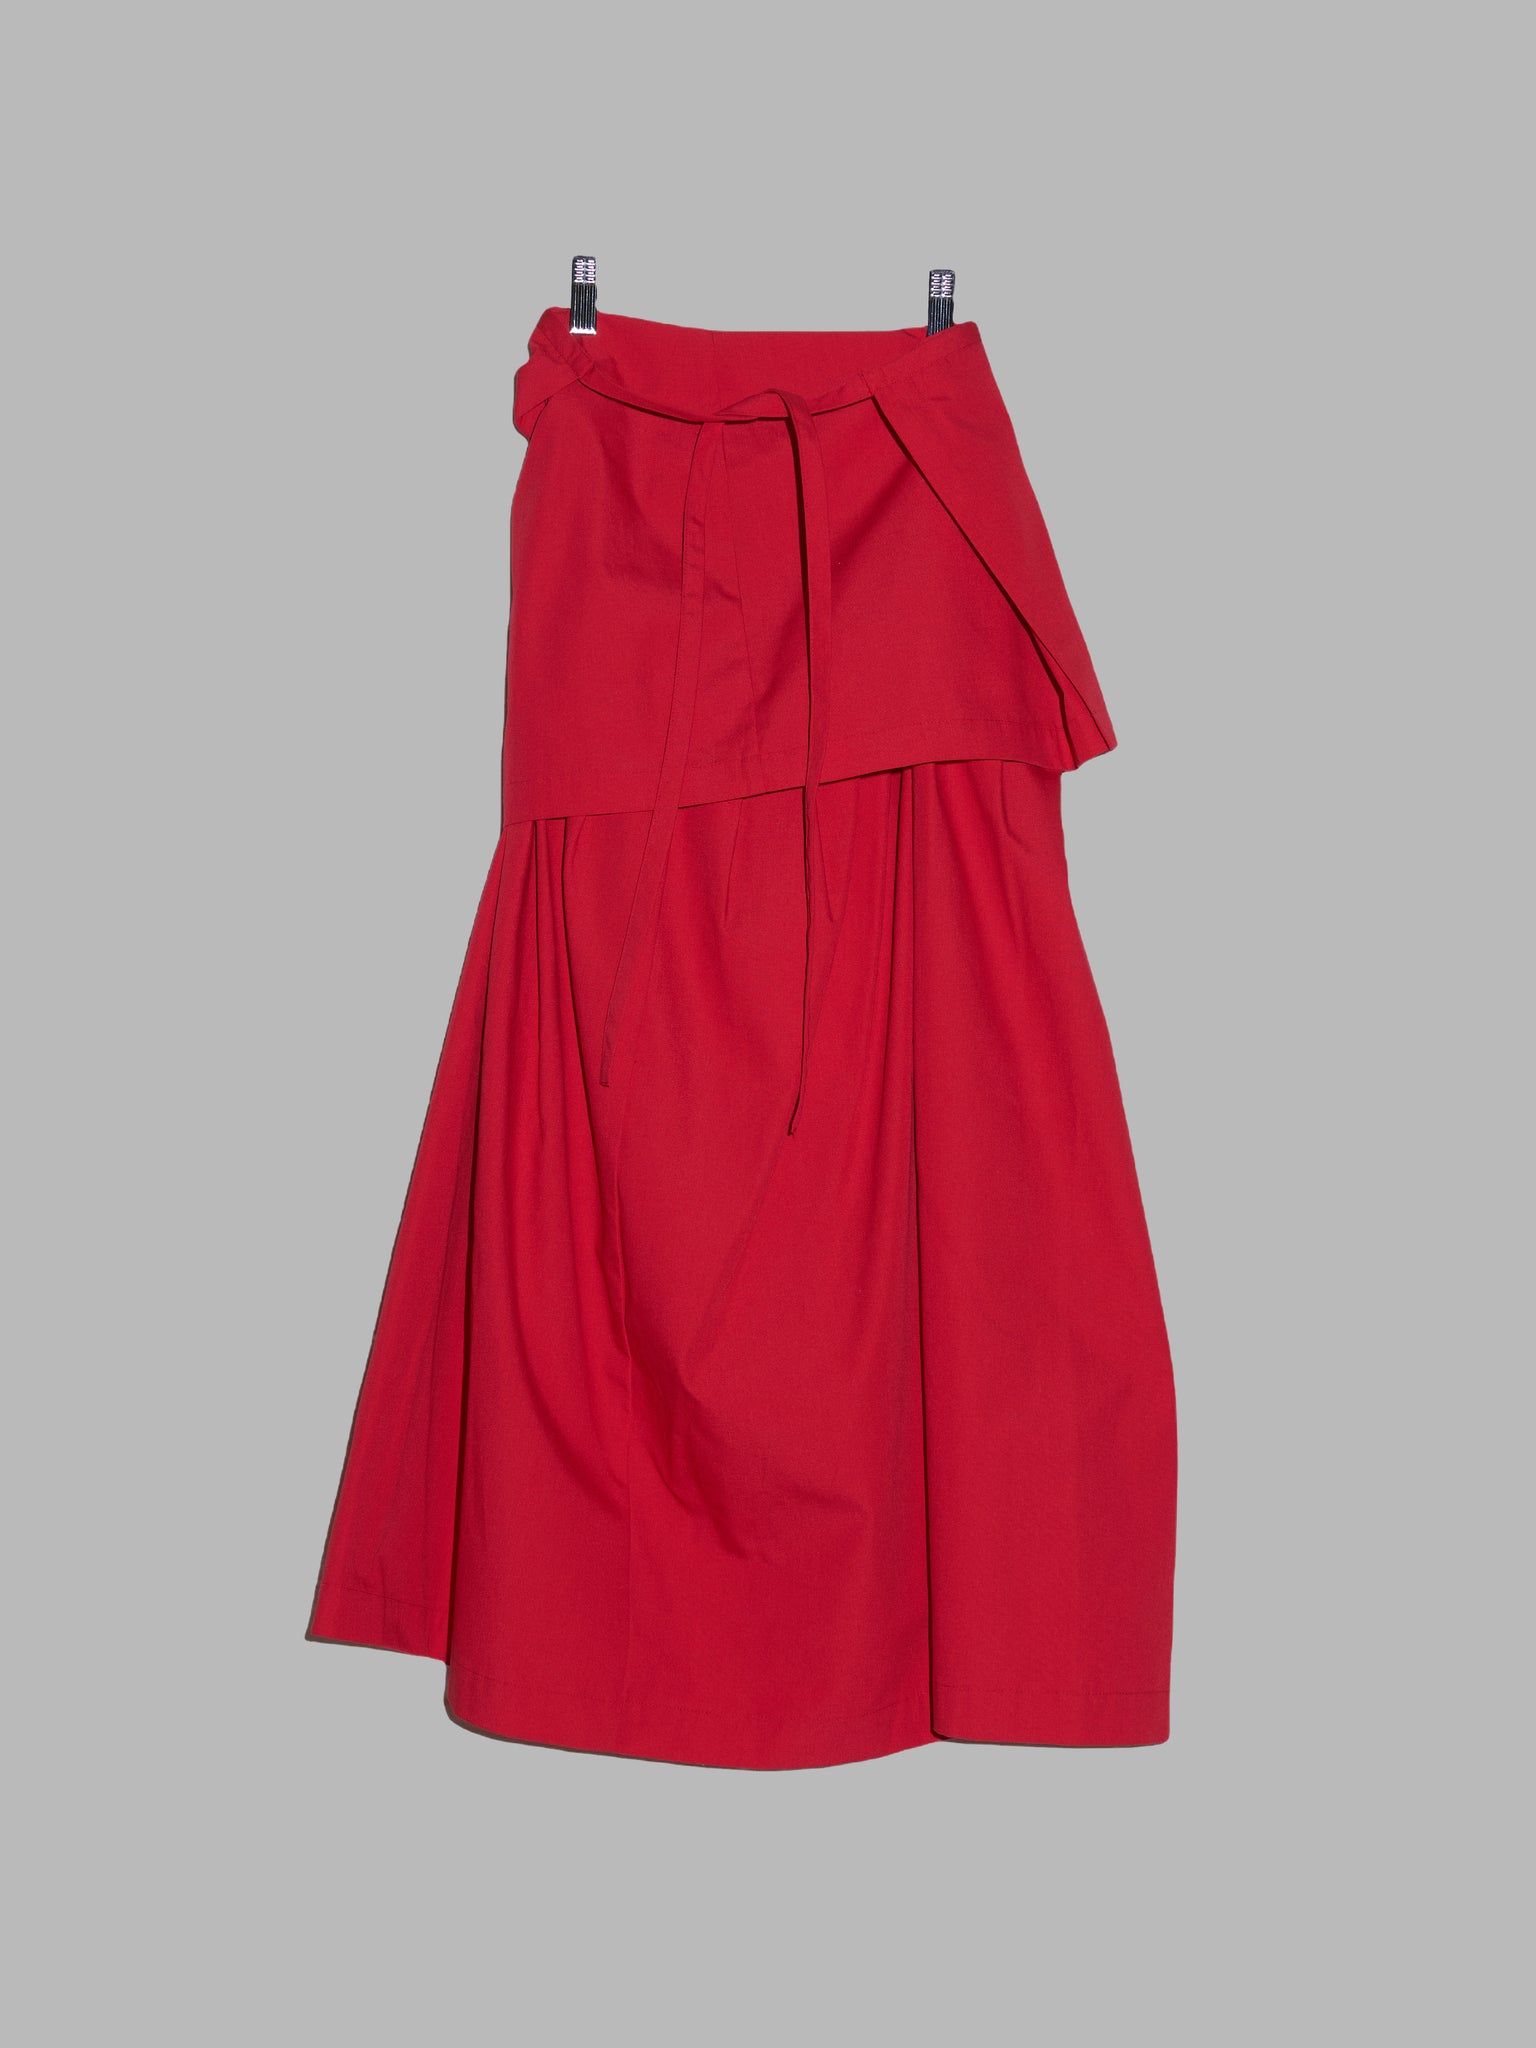 Tricot Comme des Garcons 1998 red poly-cotton layered wrap skirt - S